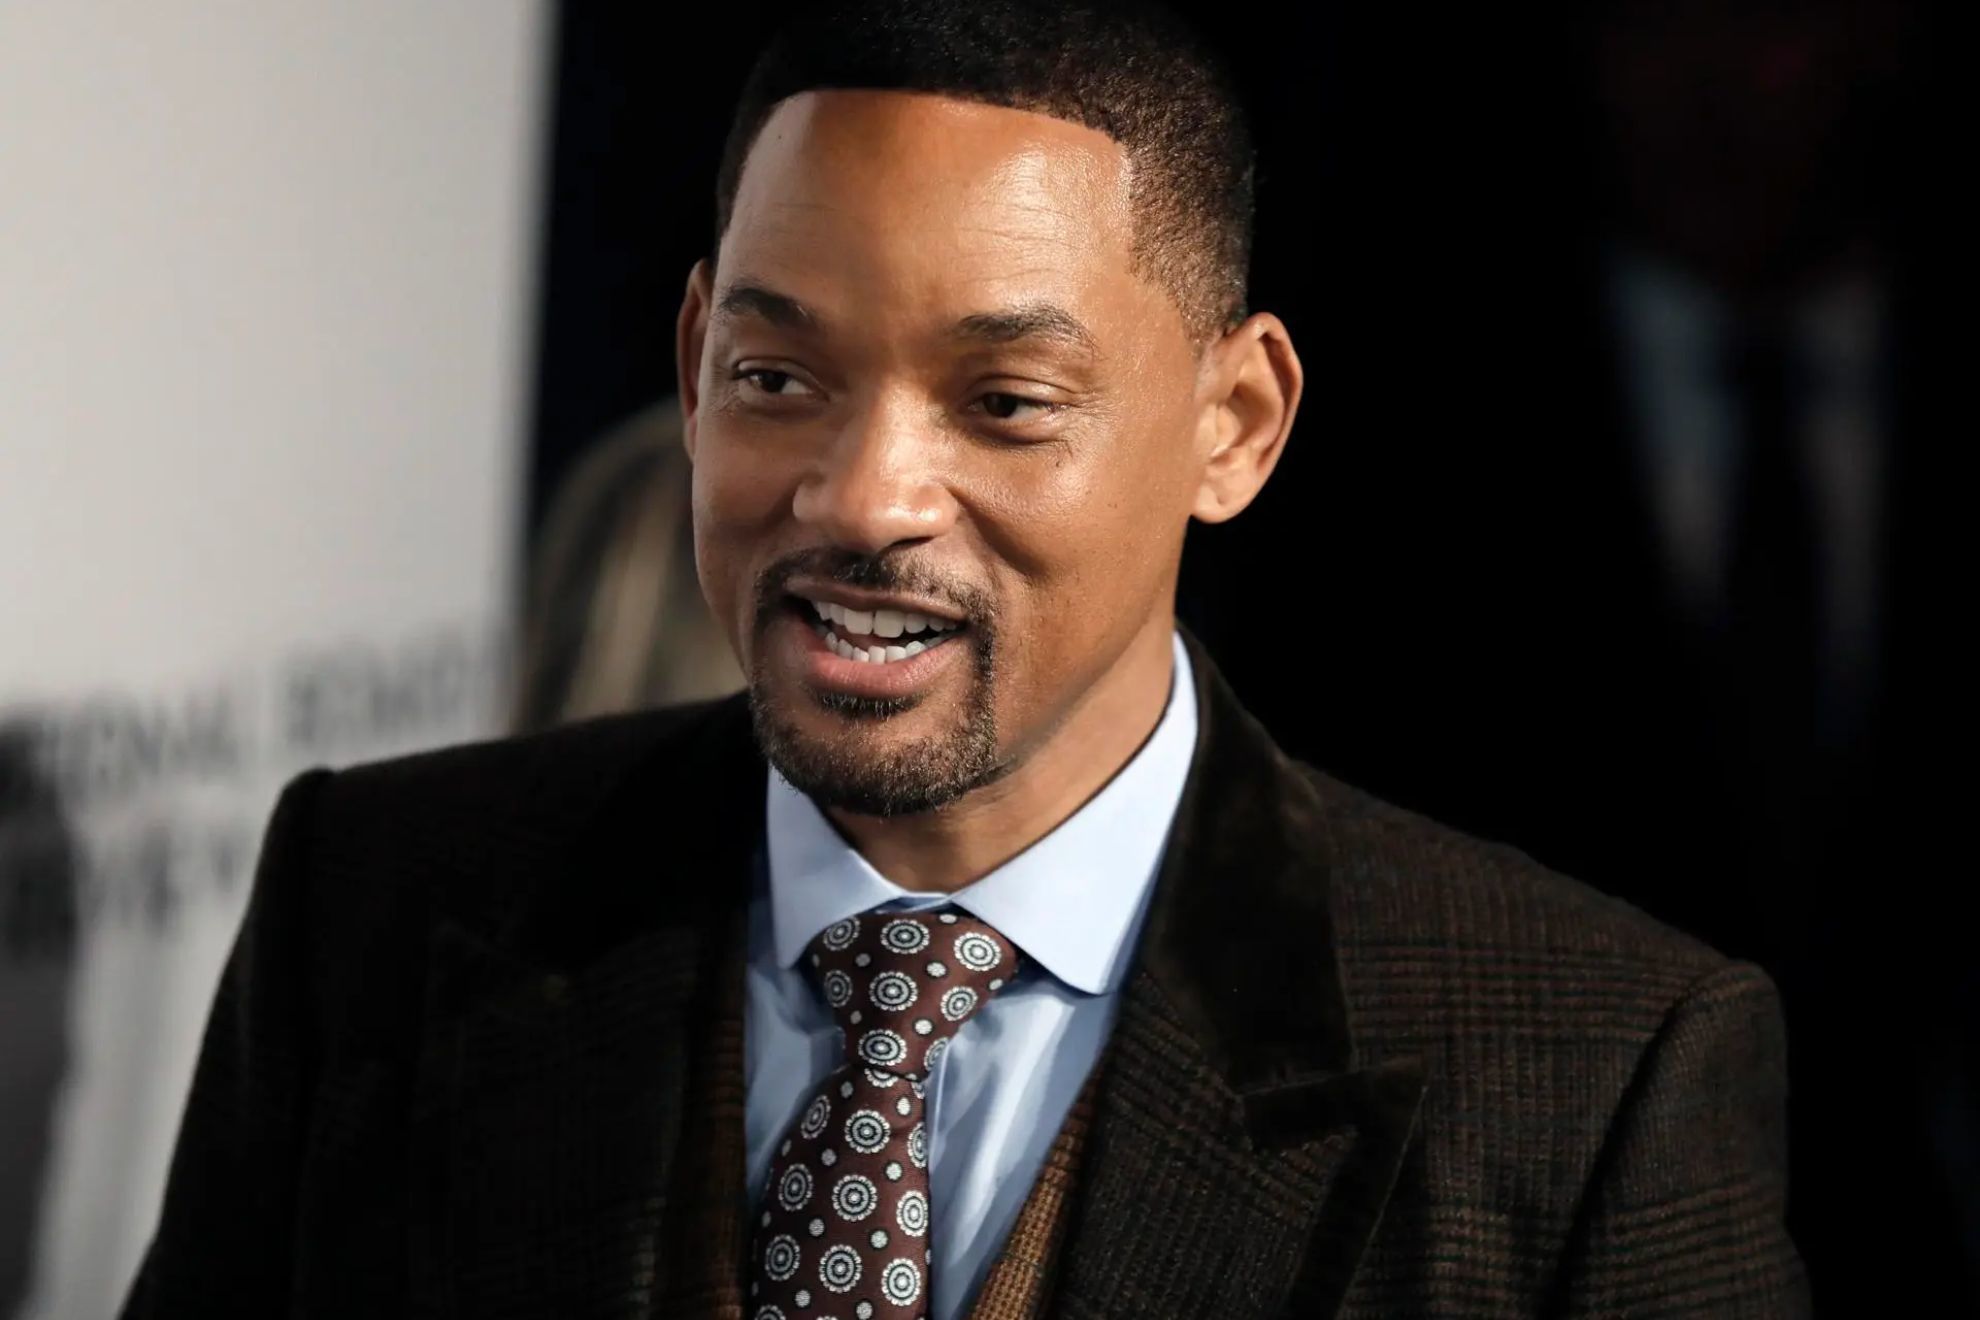 Will Smith closes his charity due to lack of donors after slapping Chris Rock at 2022 Oscars